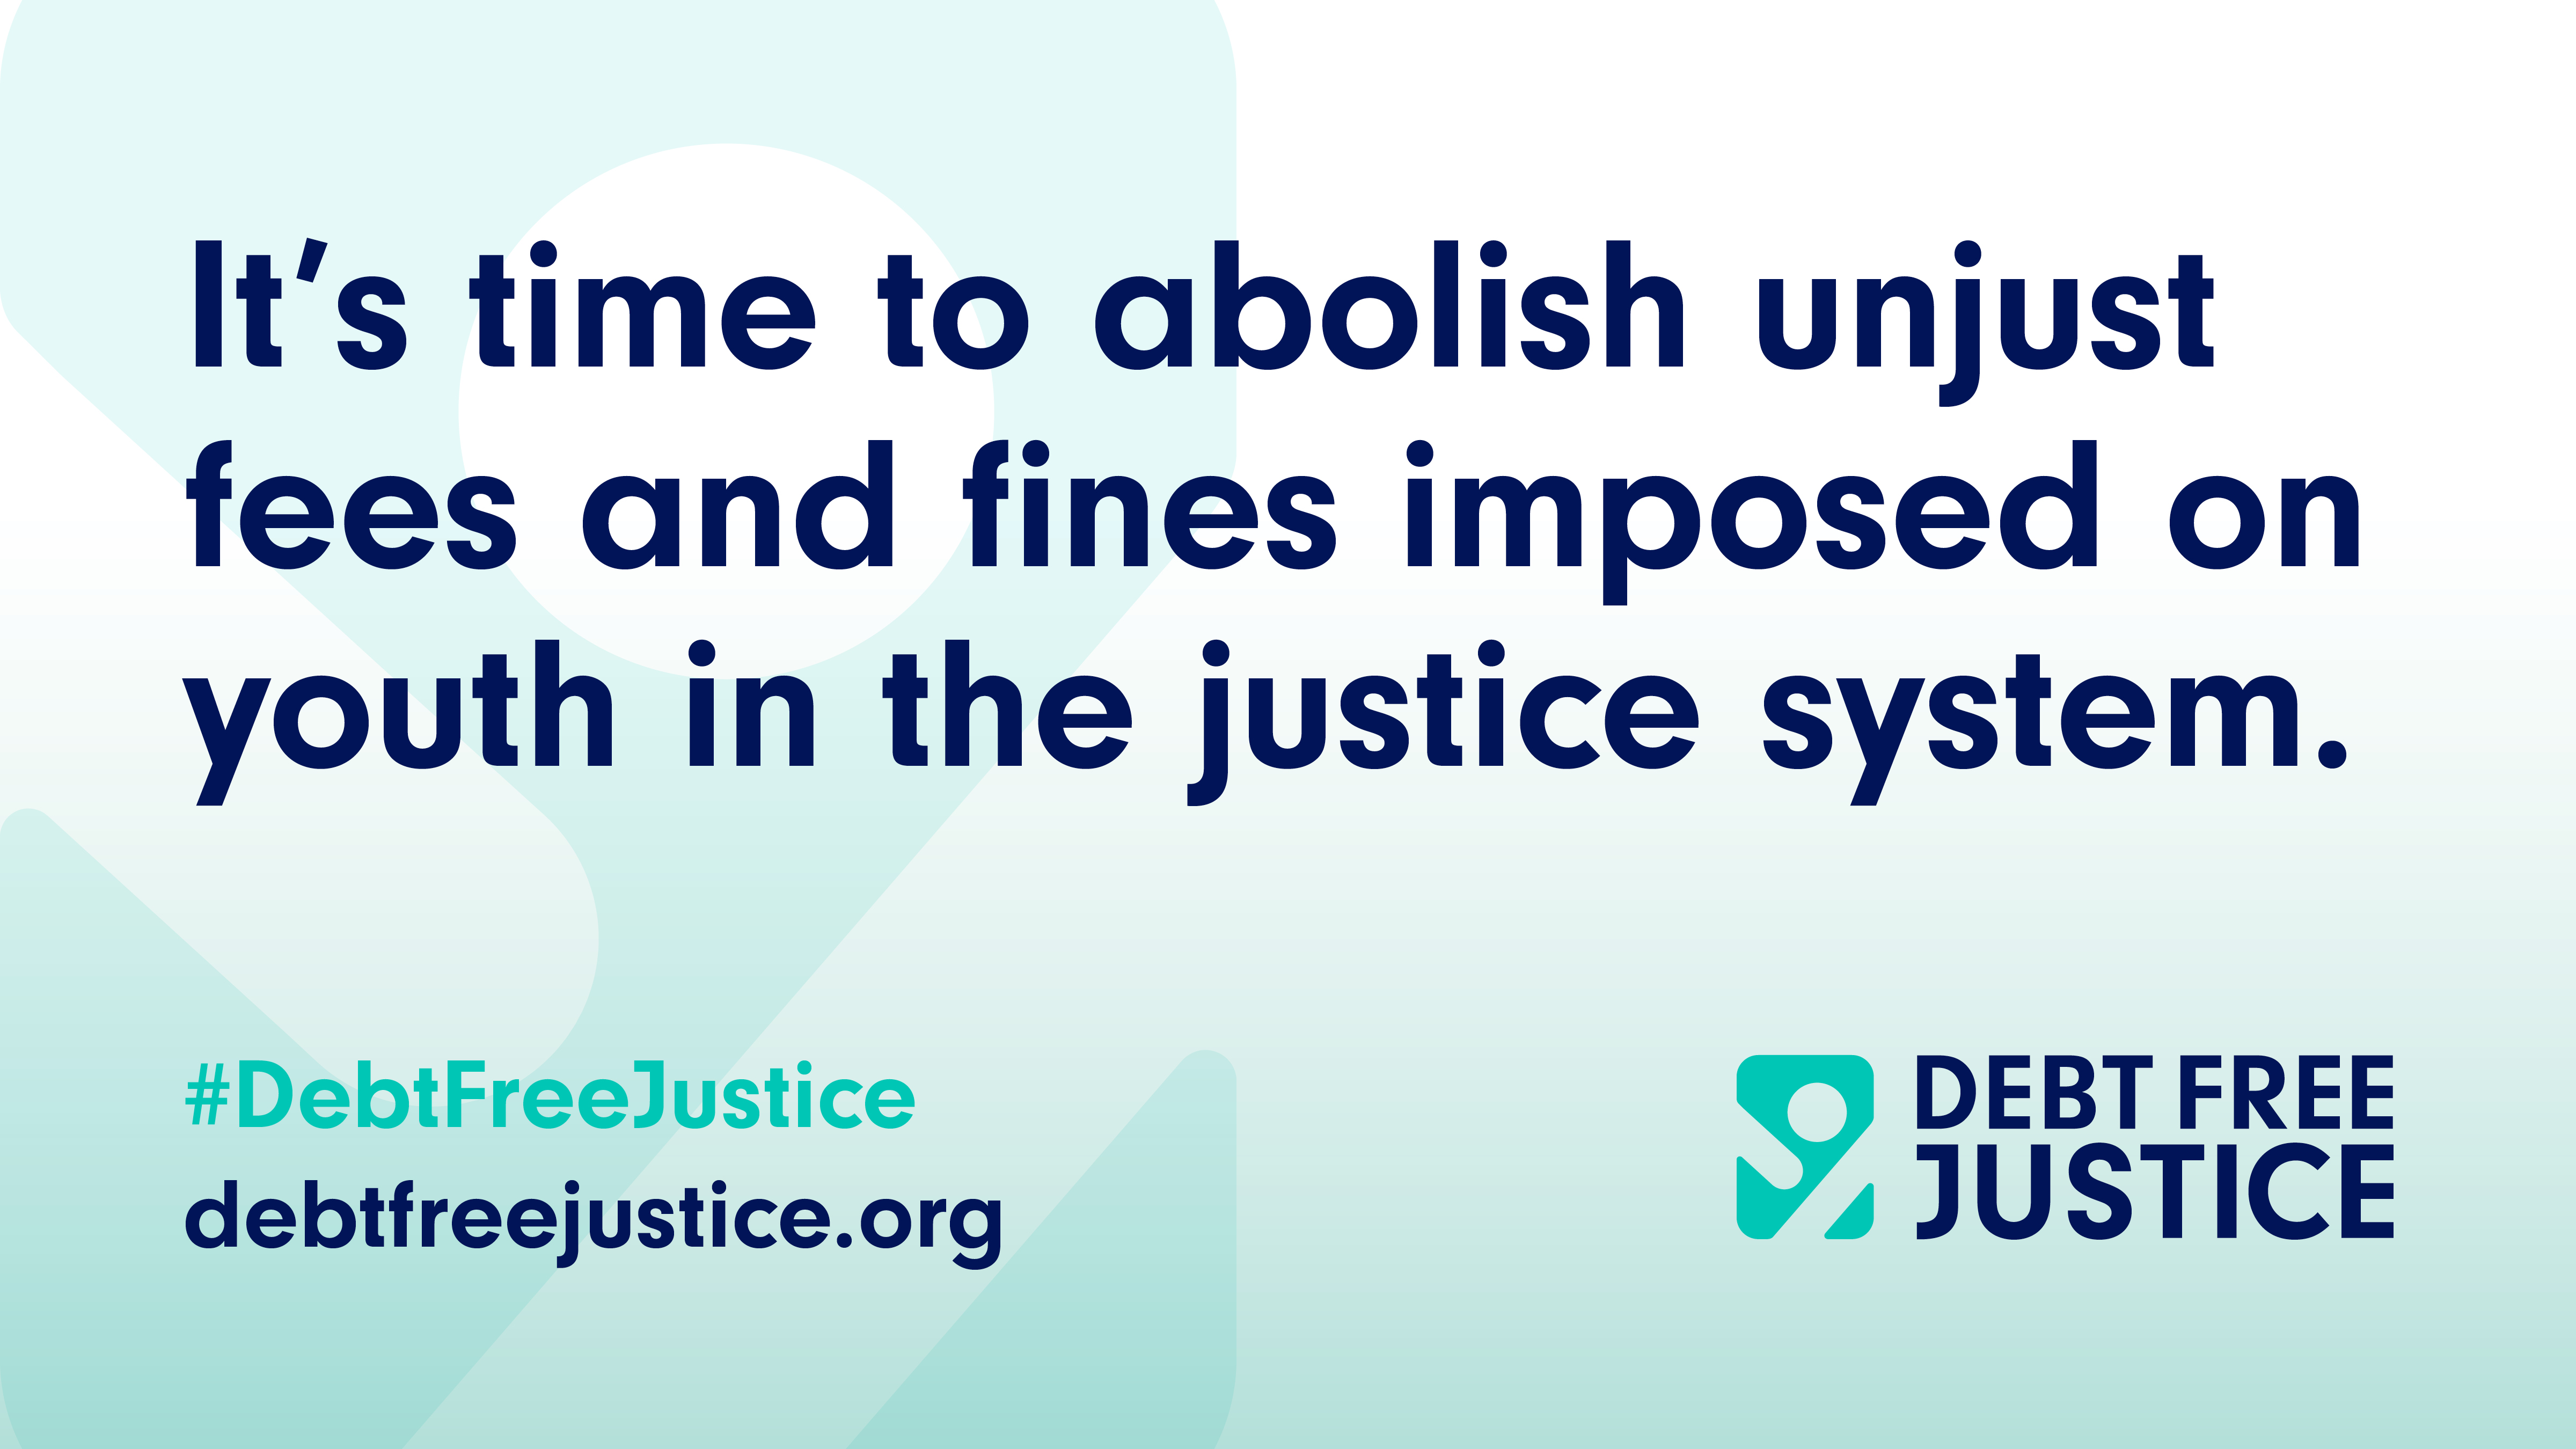 It's time to abolish unjust fees and fines imposed on youth in the justice system.